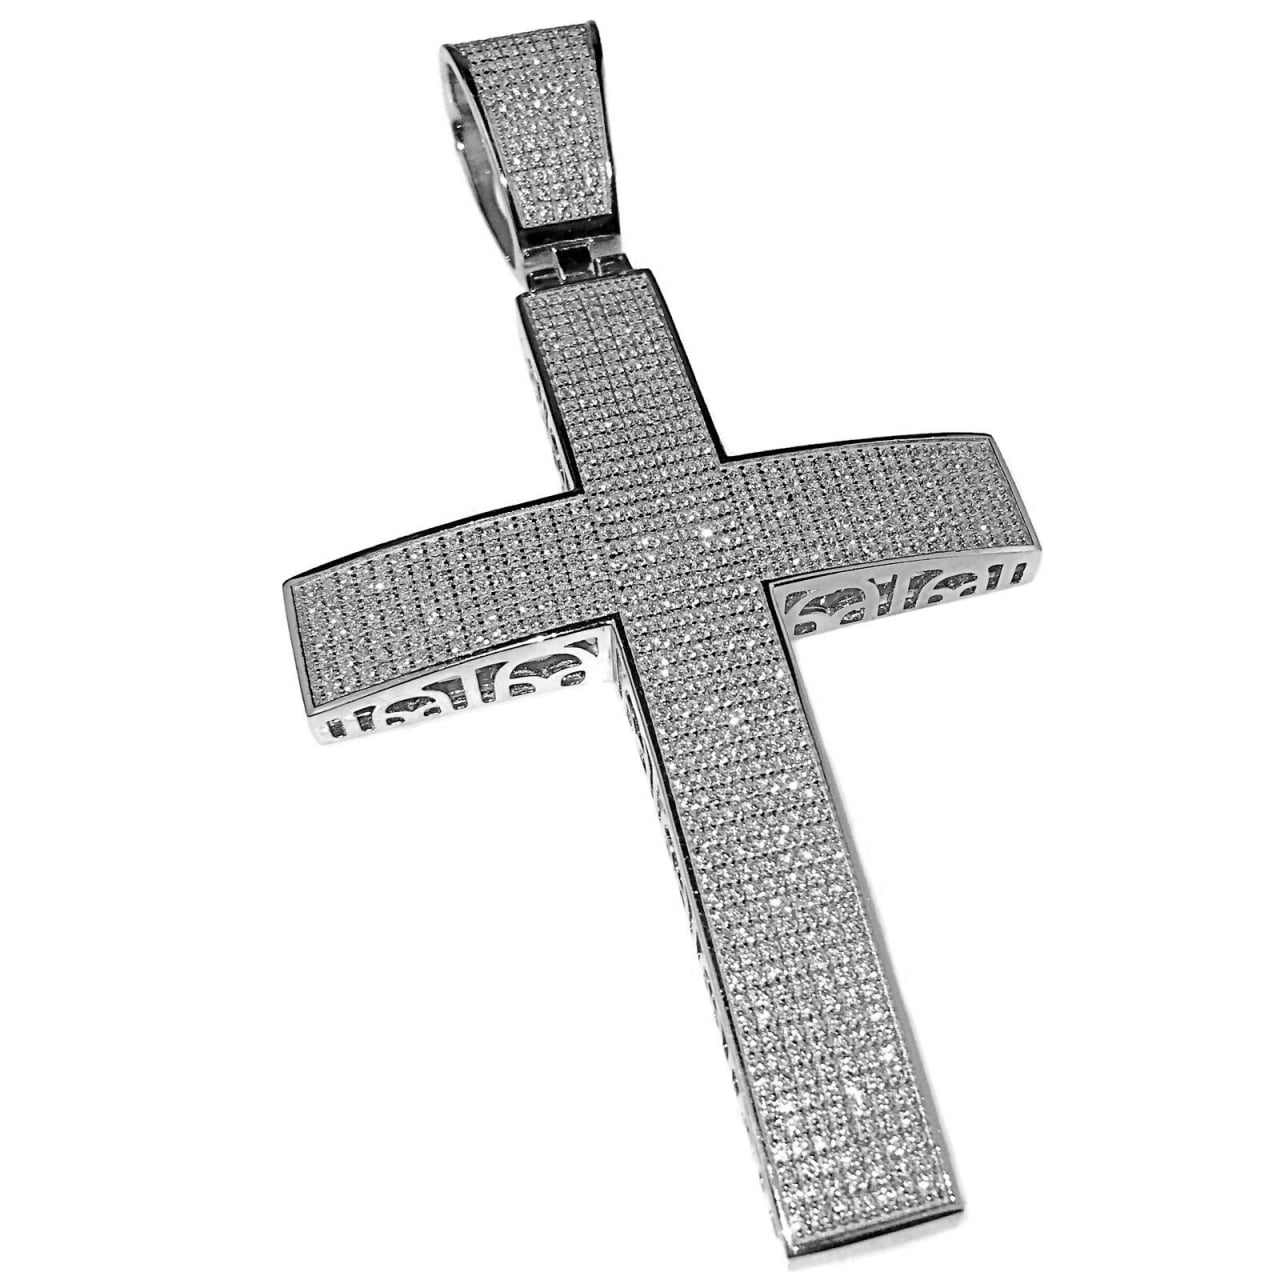 Real 925 Sterling Silver Cross Pendant Necklace Chain .925 SOLID SILVER Jewelry 